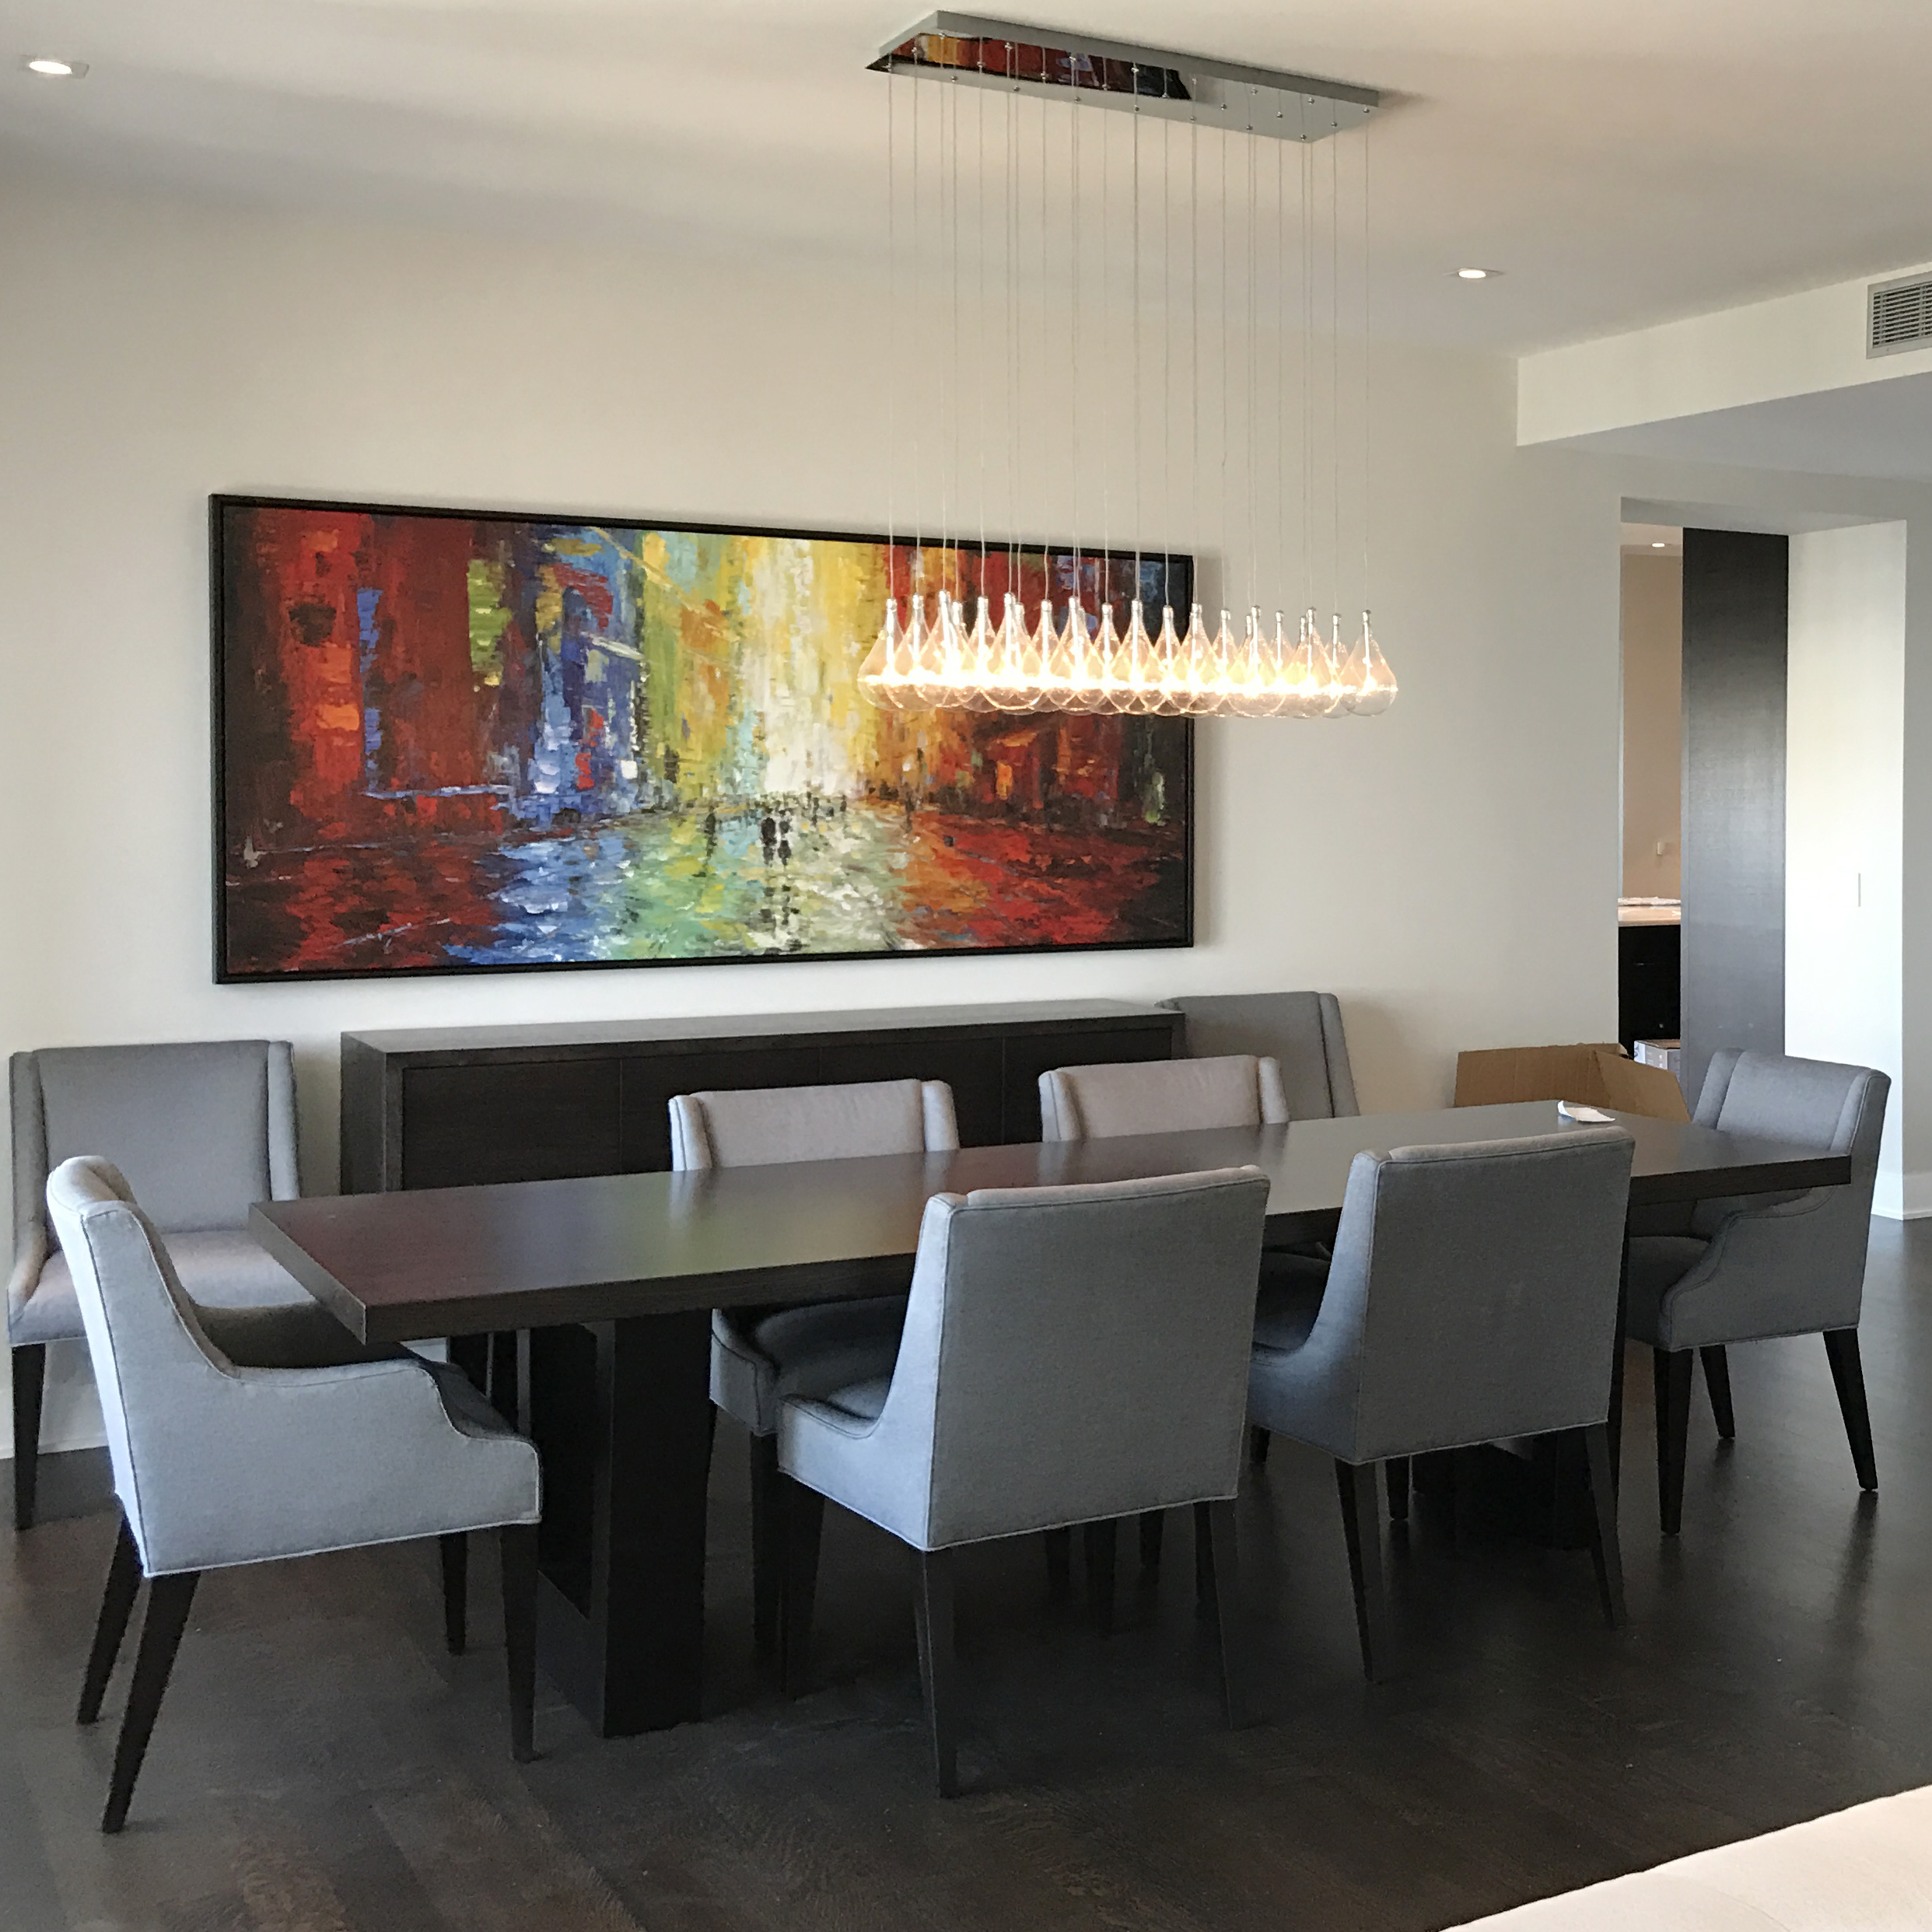 A meeting room has a long rectangular table with several gray chairs in the middle. A large, horizontal, colorful art piece is on the wall.